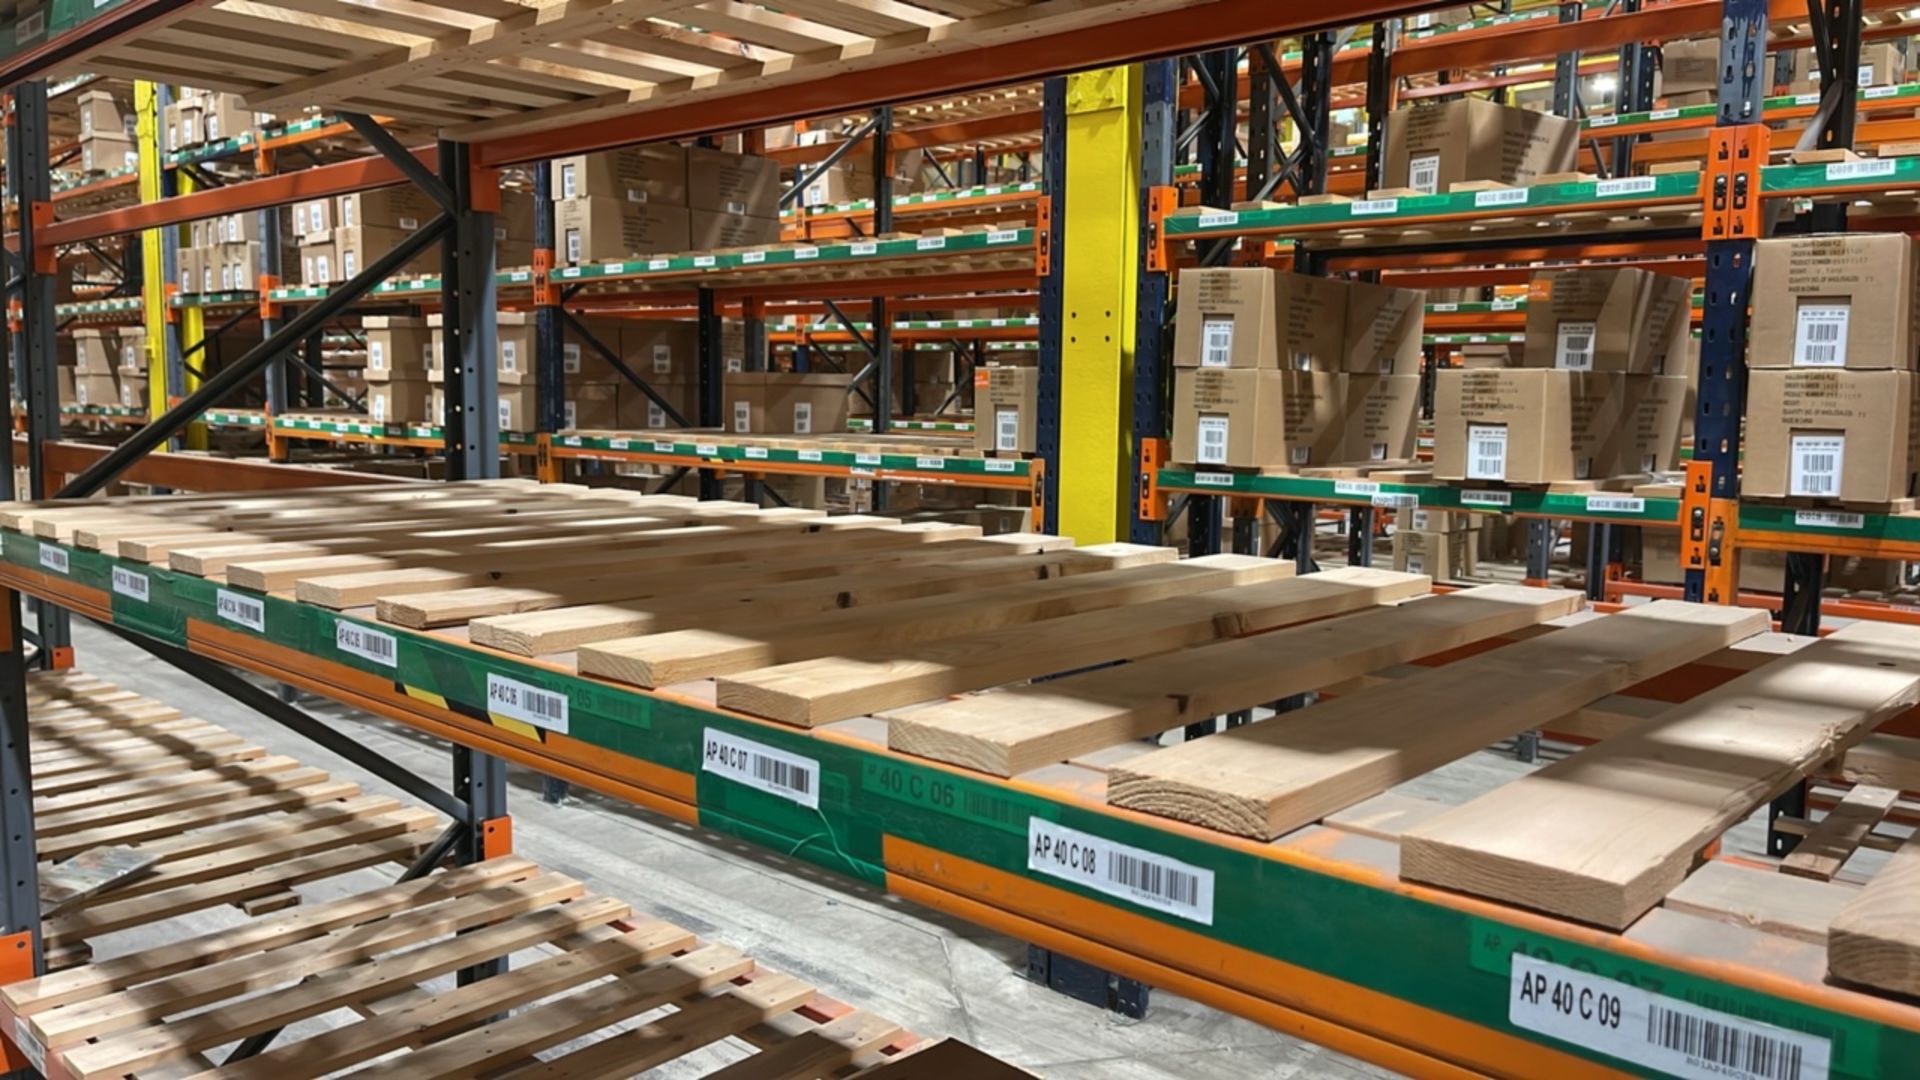 Run Of 20 Bays Of Boltless Industrial Pallet Racking - Image 9 of 11